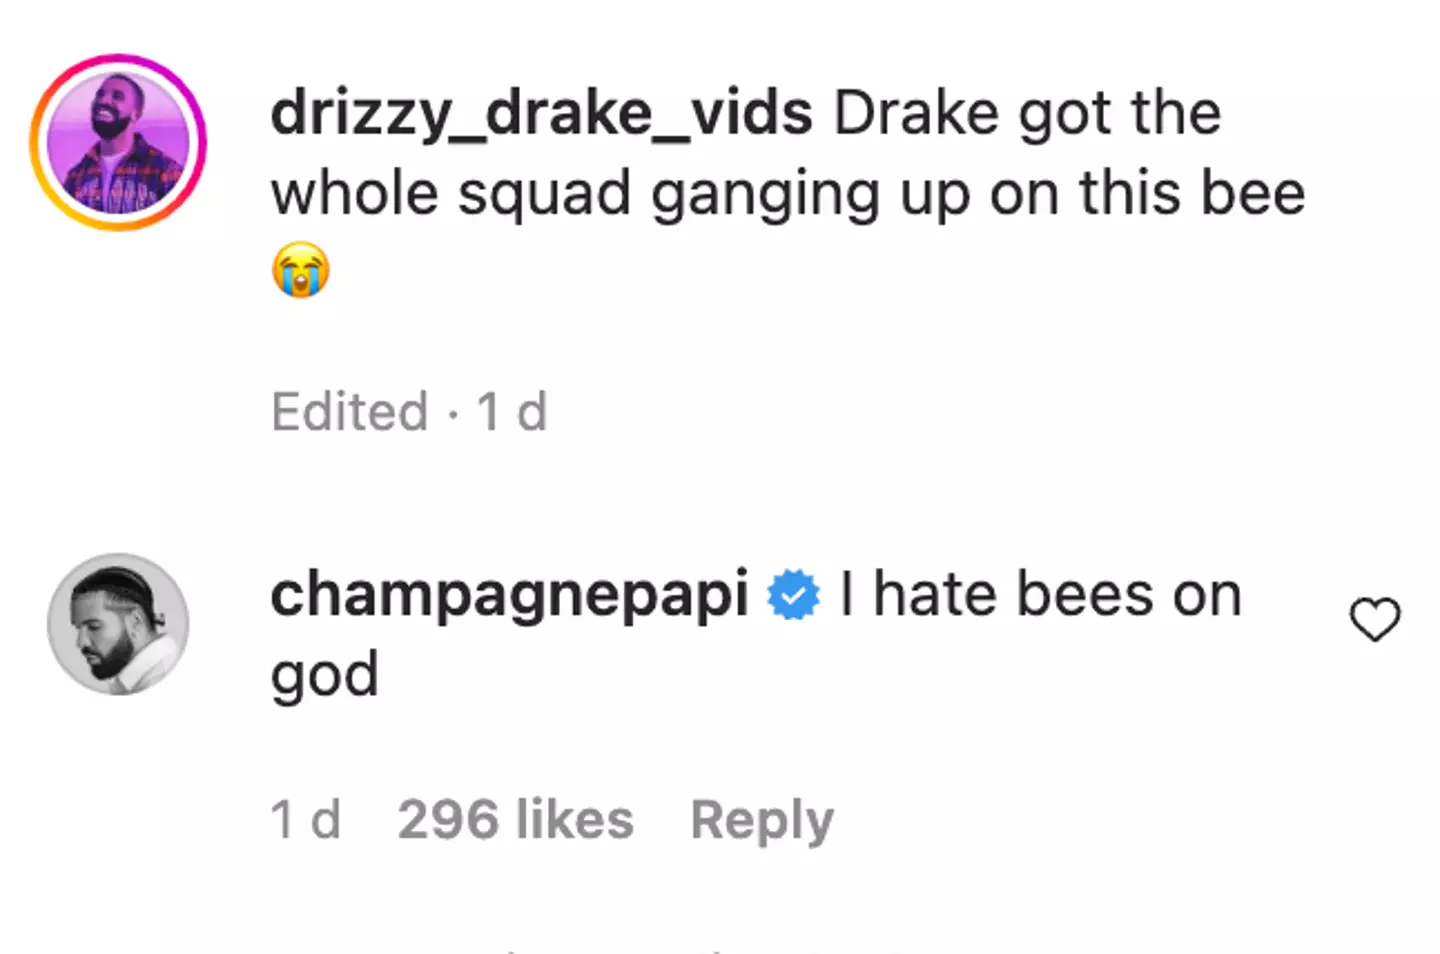 Drake responded to the video to confirm he 'hates' bees.